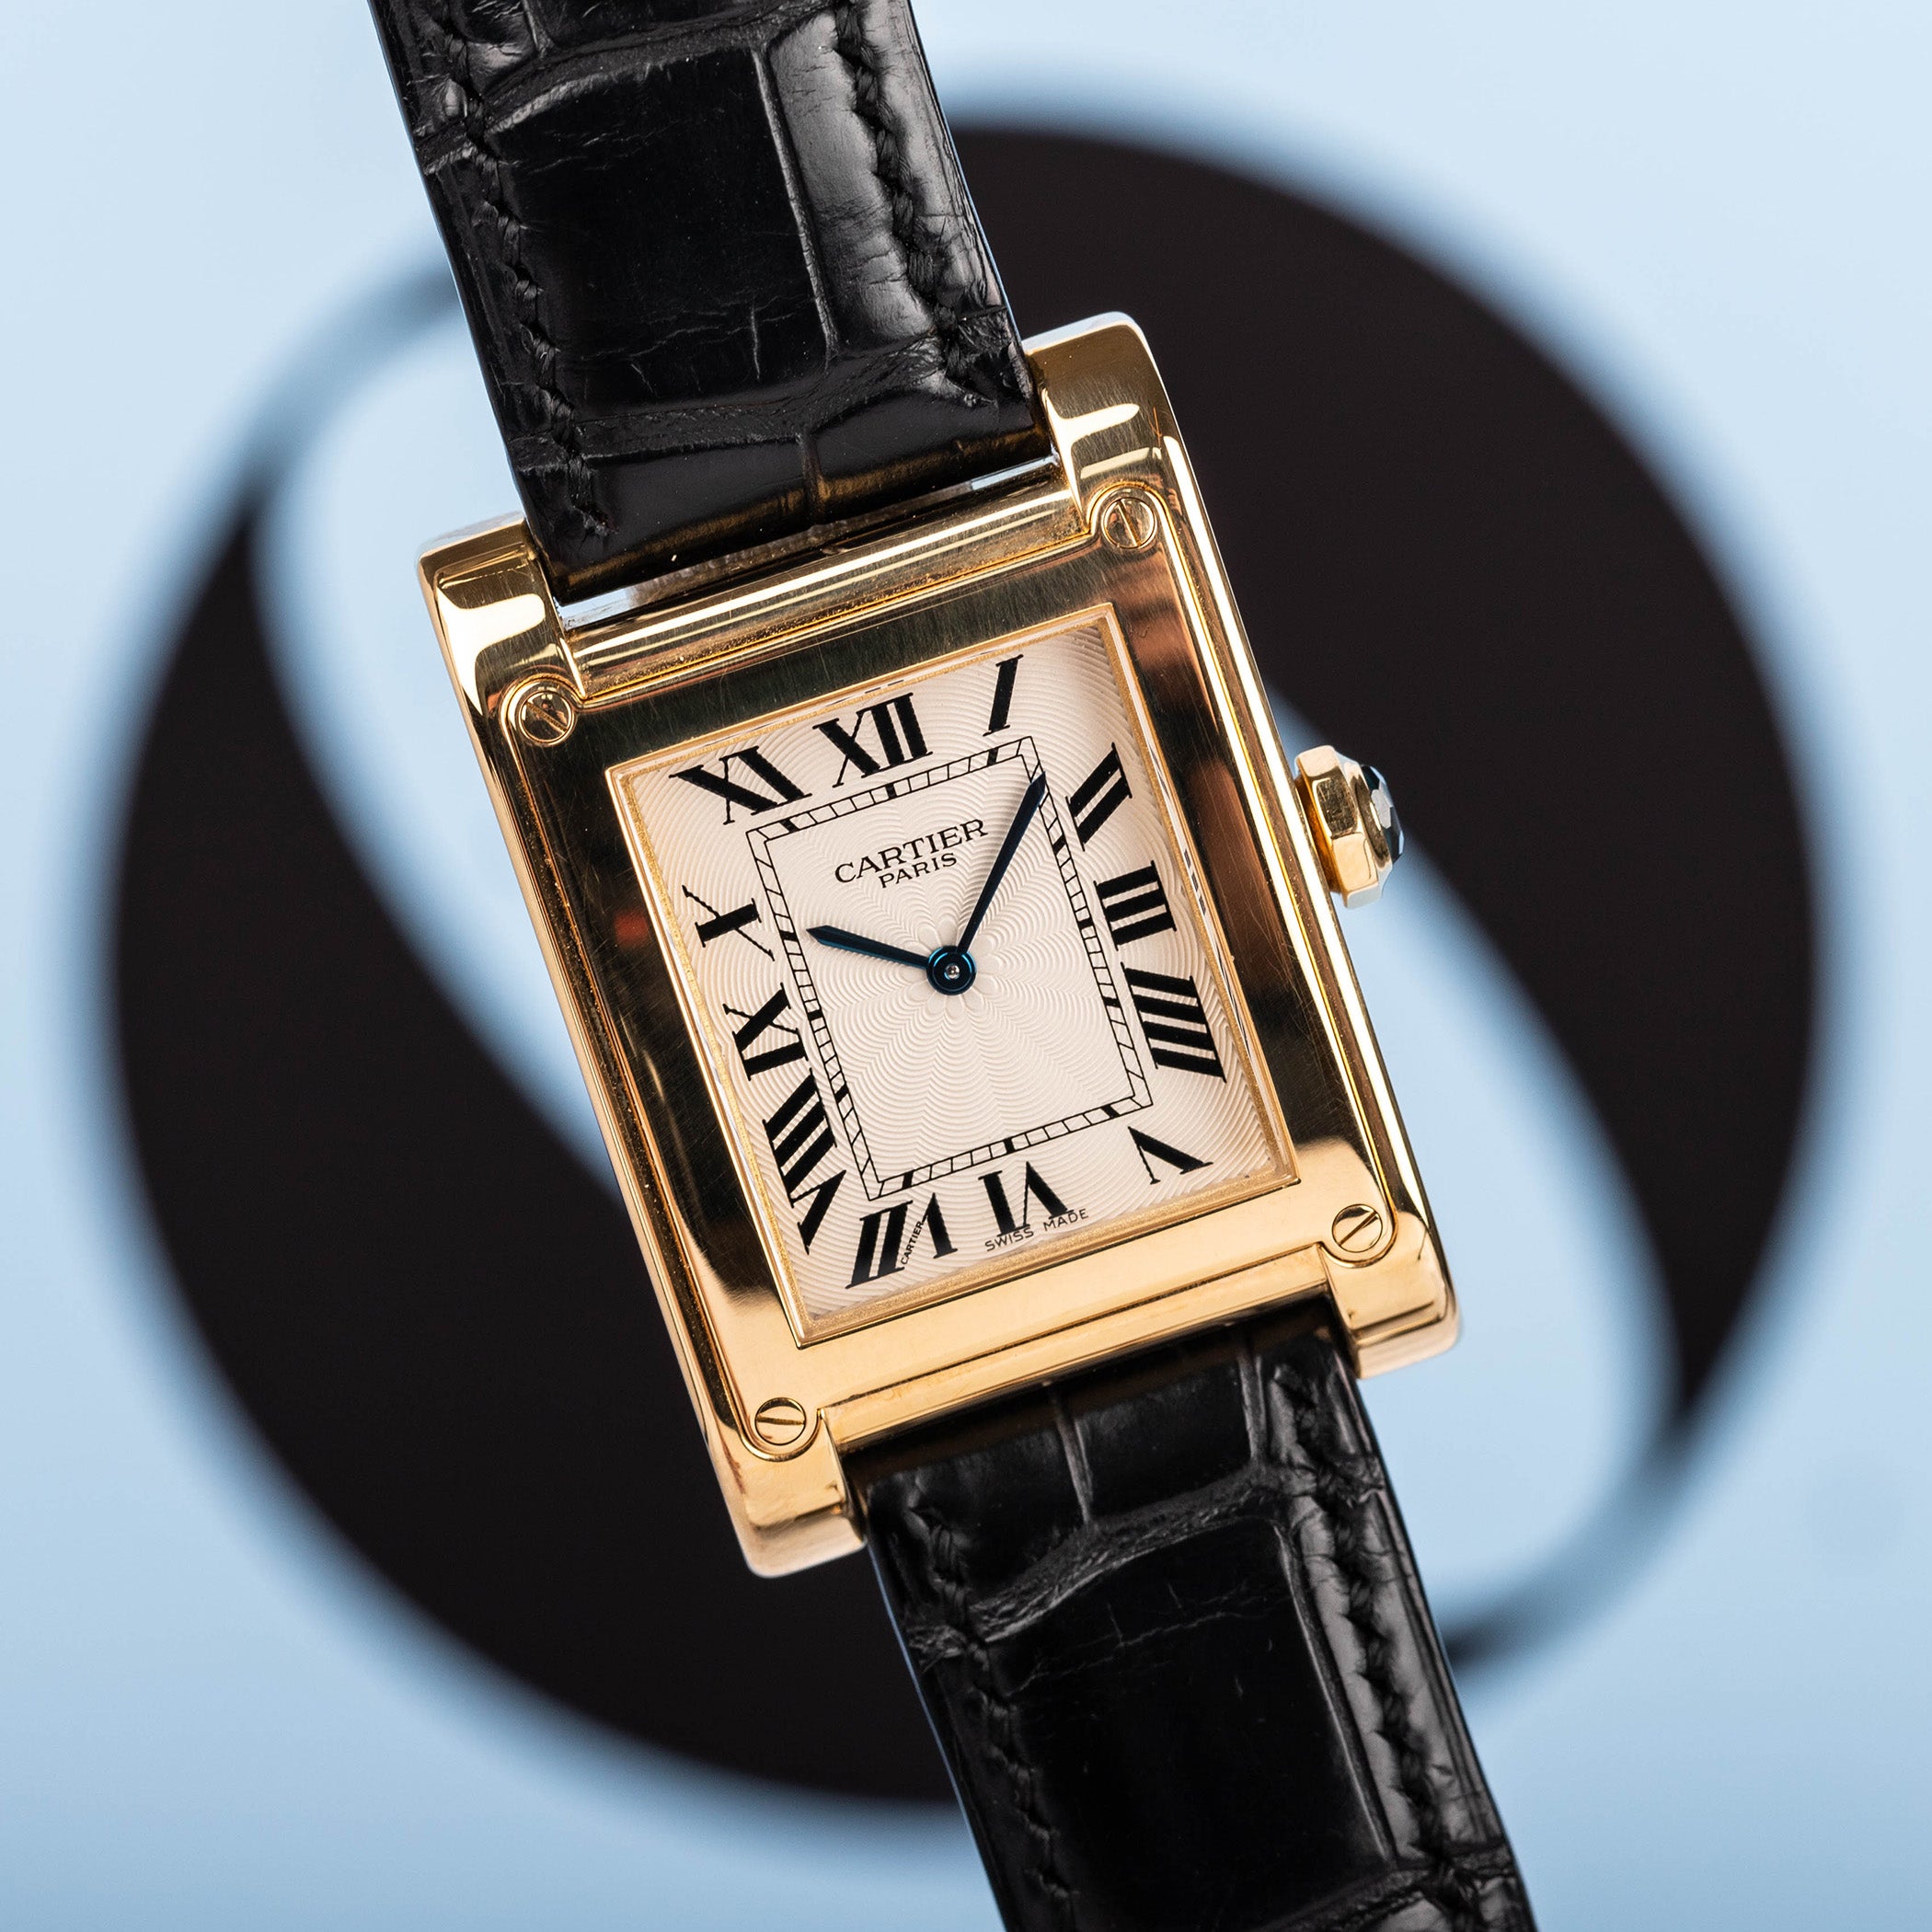 Circa 2000 Cartier Tank à Vis ref 2608F from the Collection Privée Car ...